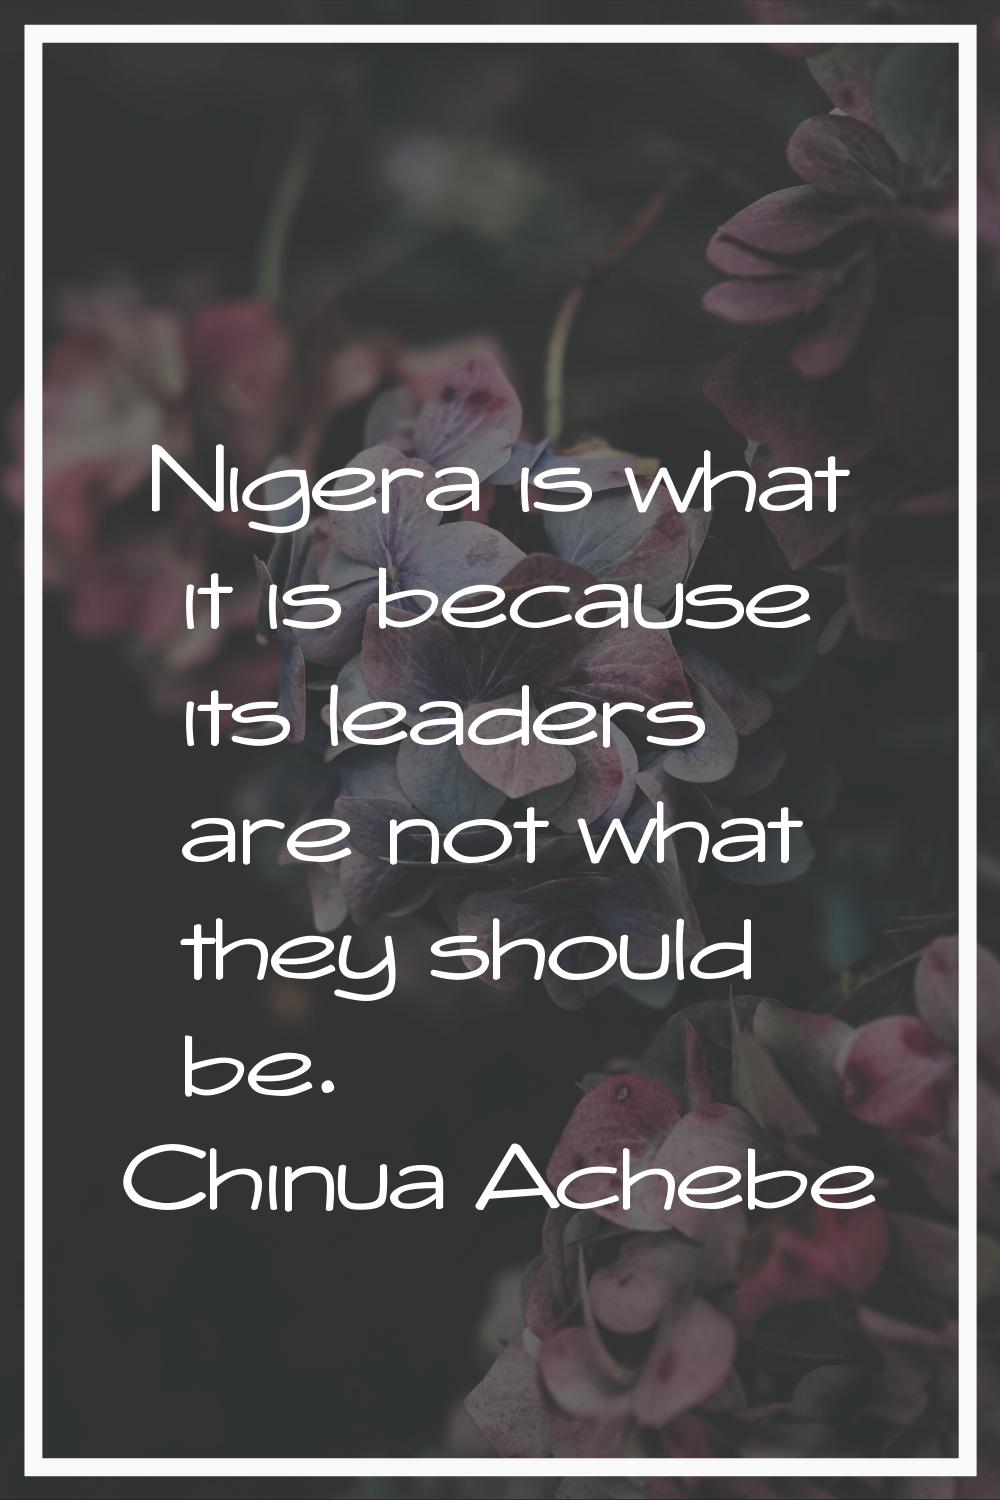 Nigera is what it is because its leaders are not what they should be.